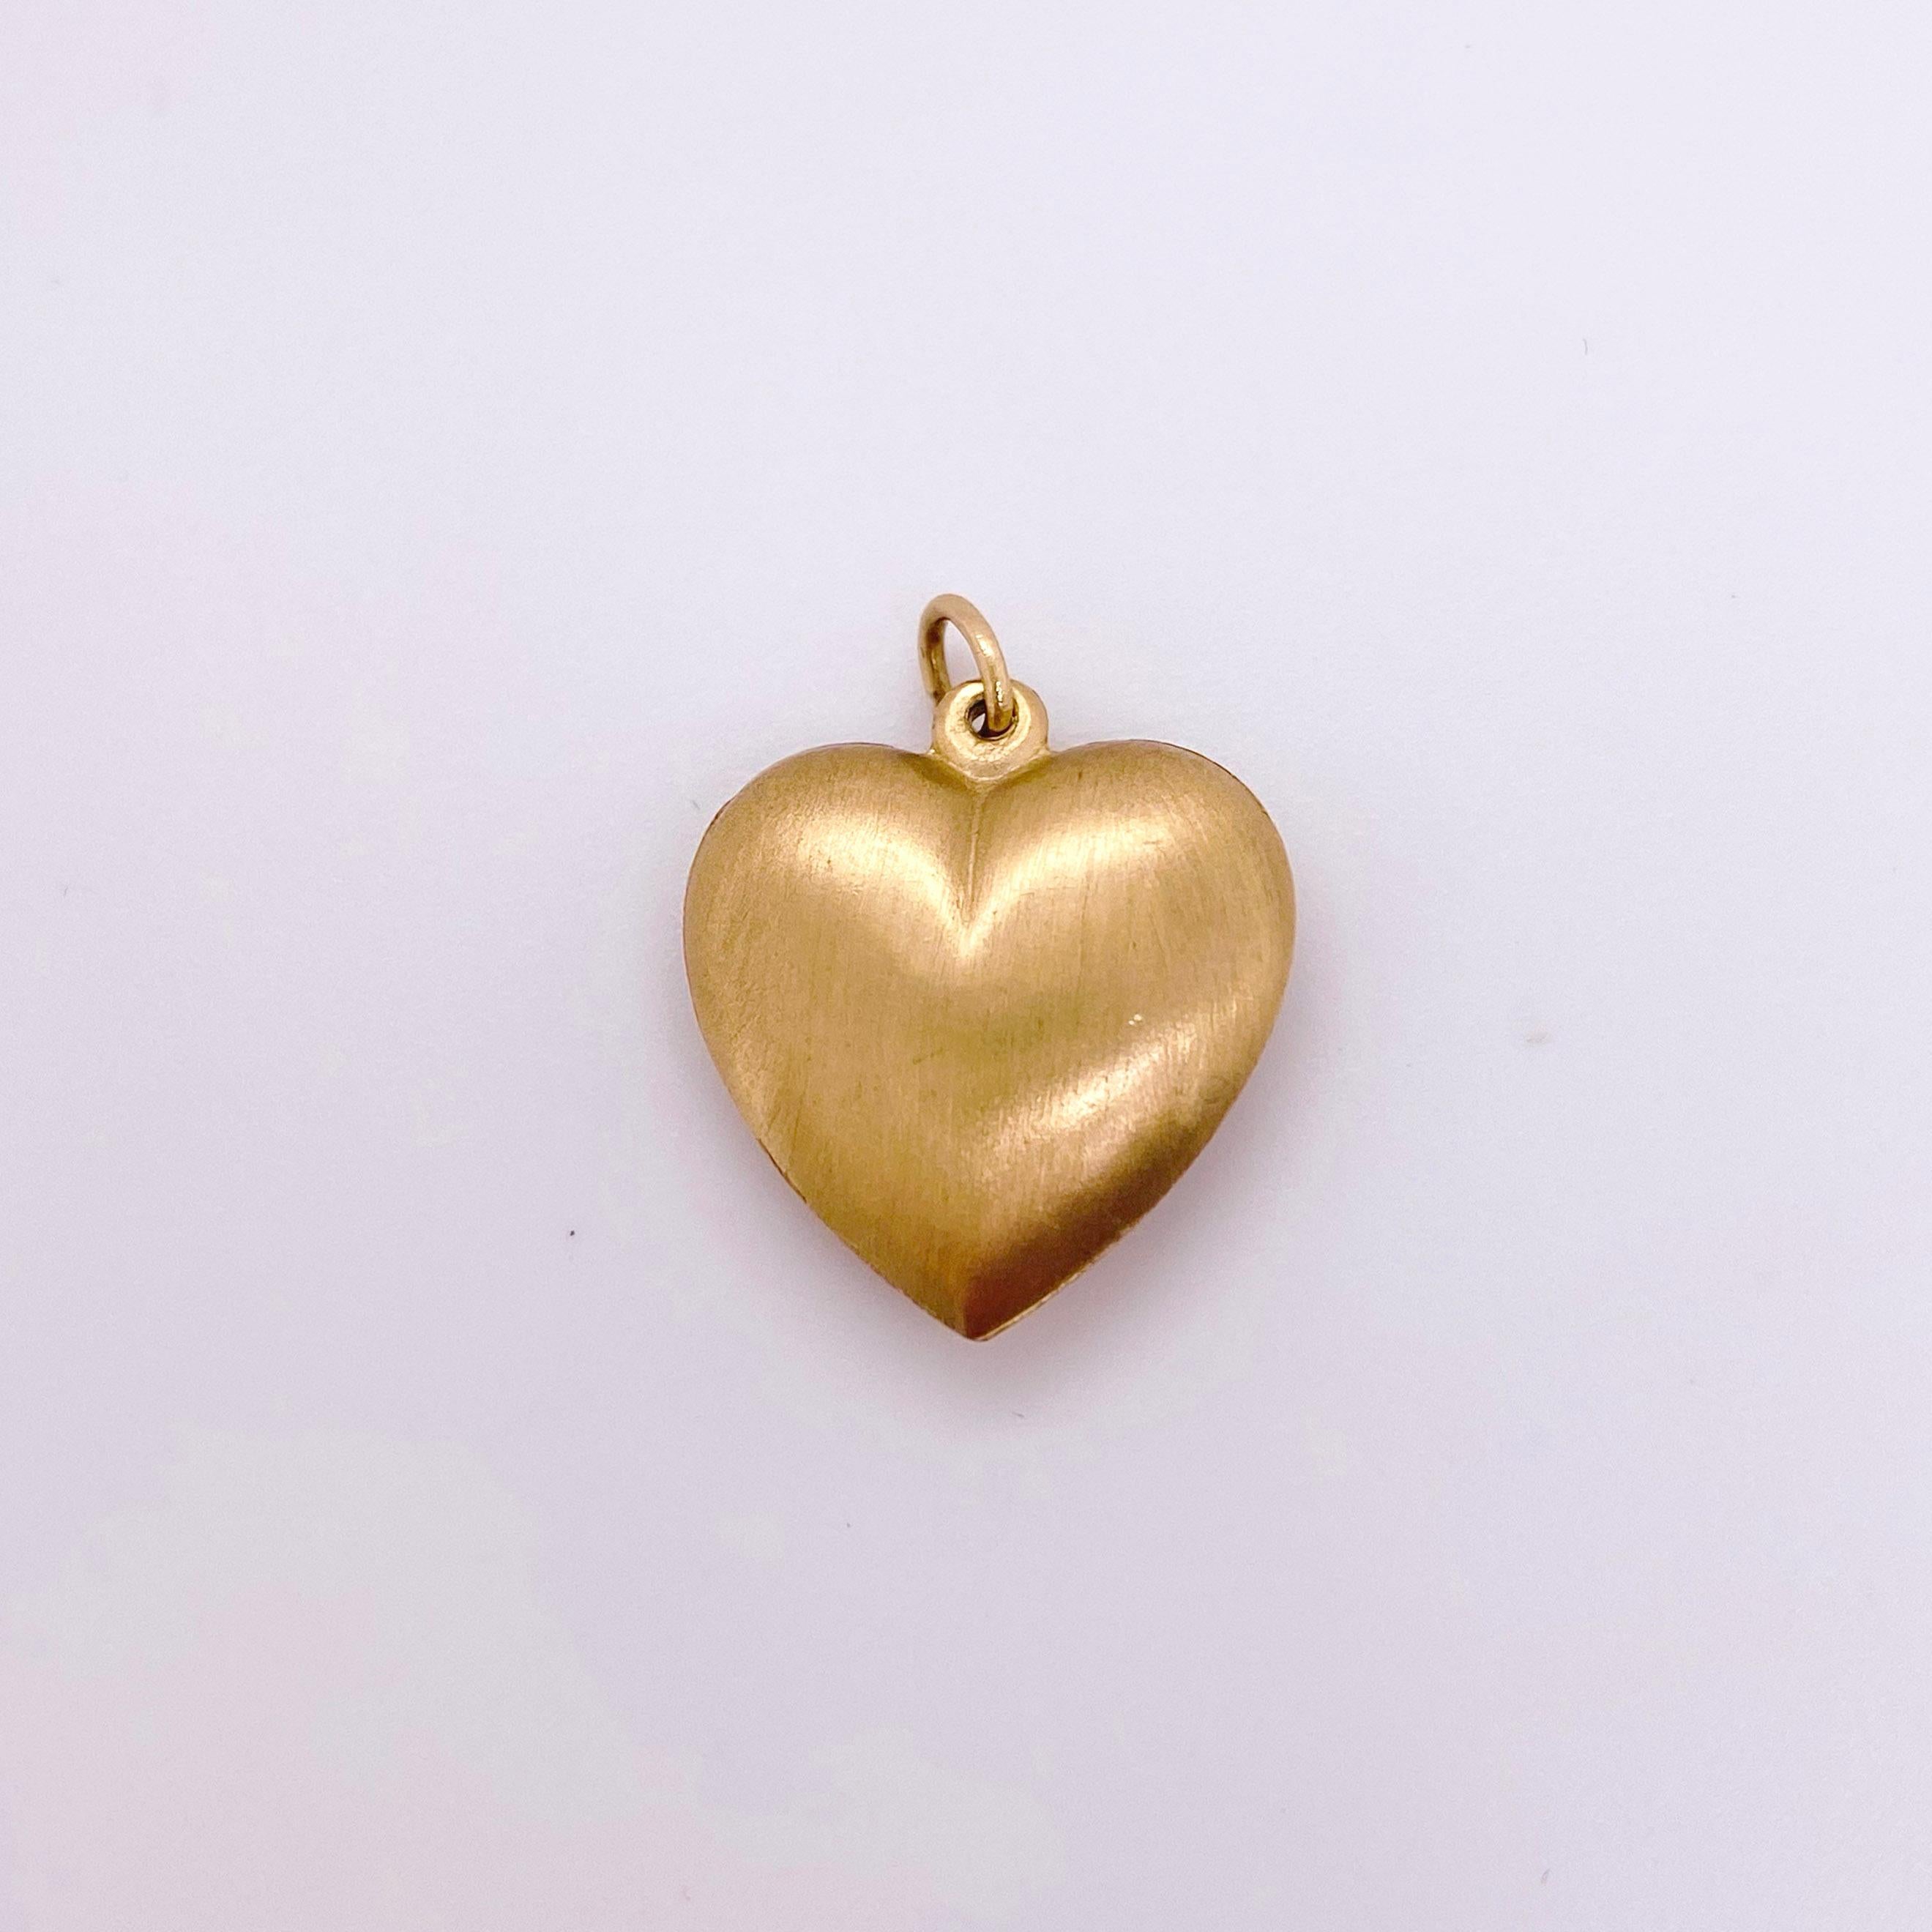 This delicate puffed heart is perfect as a pendant on a chain or a charm on a bracelet.  It has a very attractive finish that is Florentine and diamond cut and this is on both sides.
The details for this beautiful necklace are listed below:
Metal